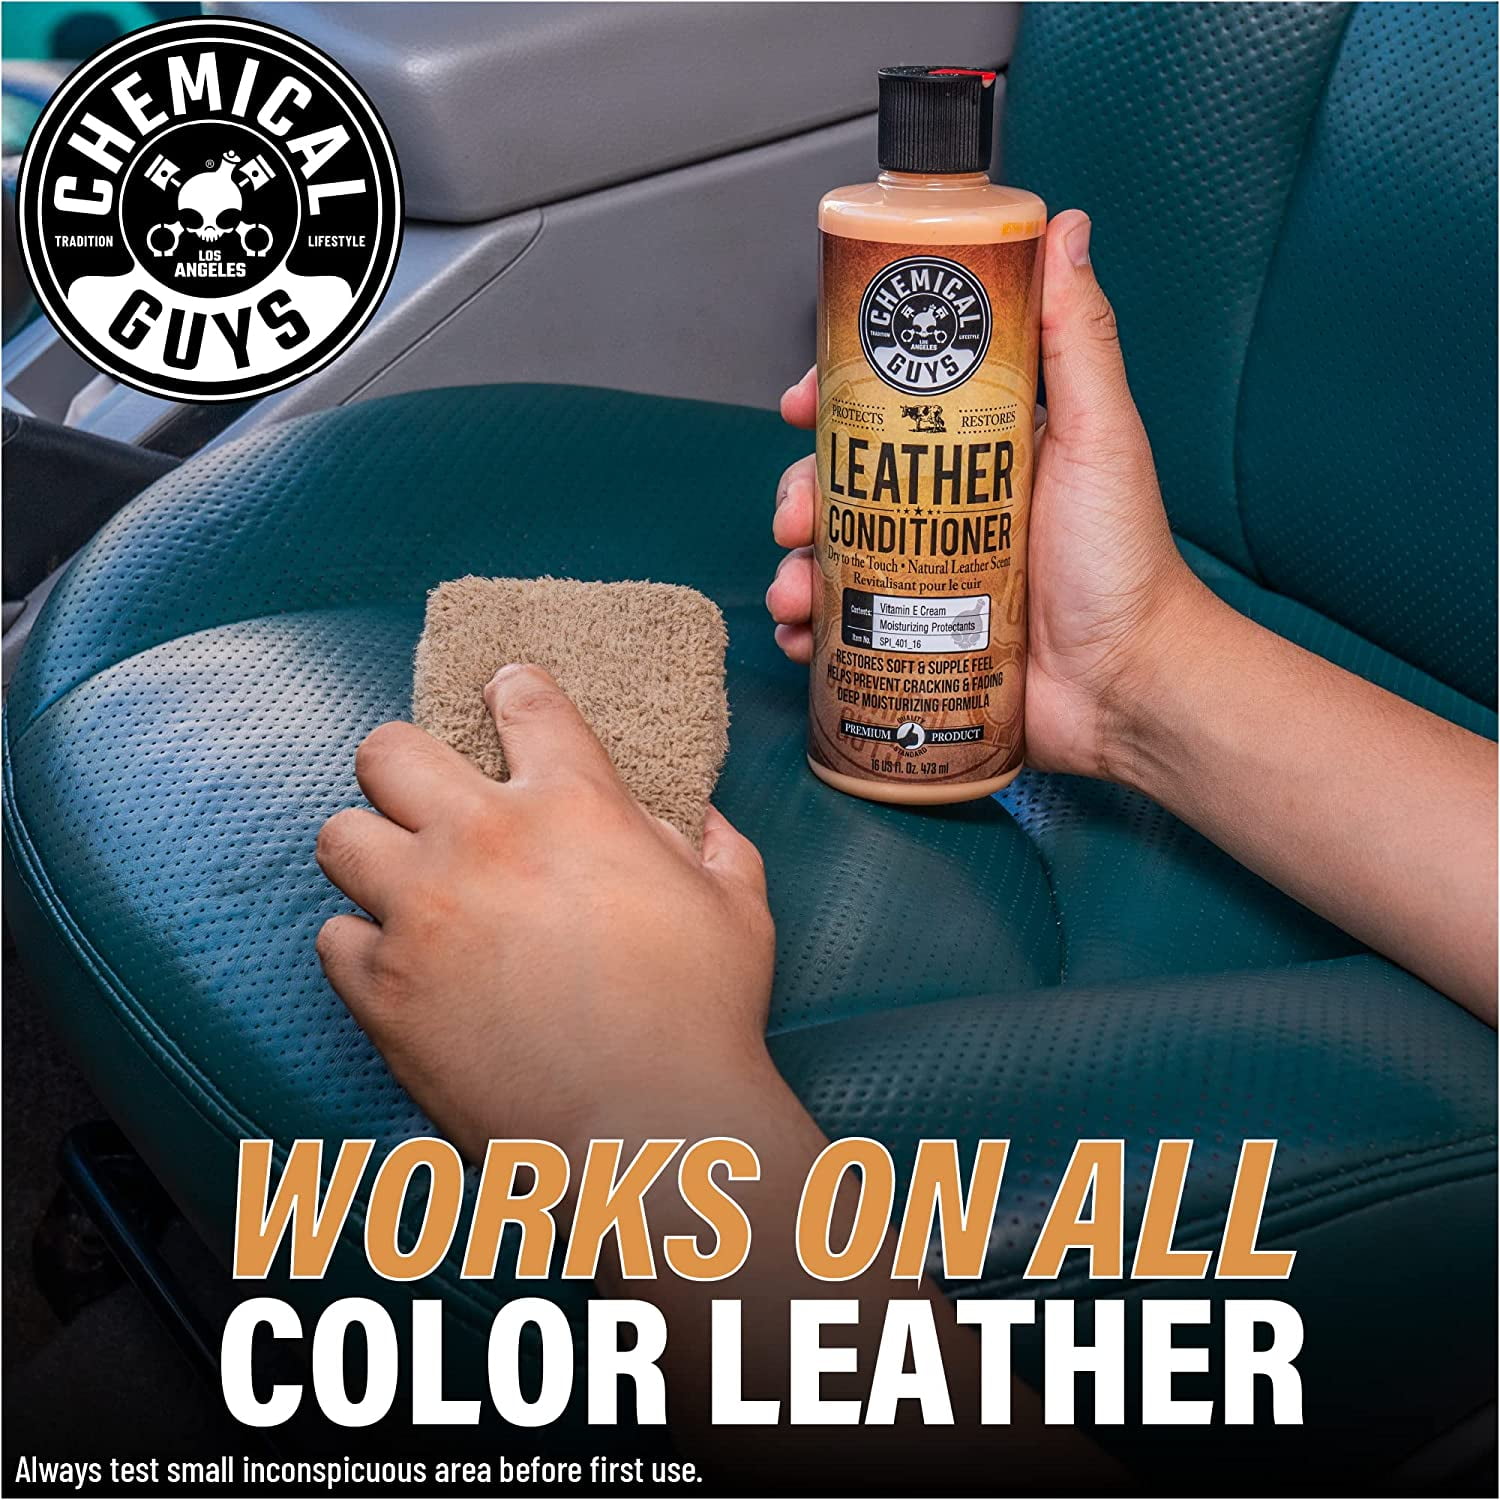 Chemical Guys Leather Conditioner - 16 fl oz